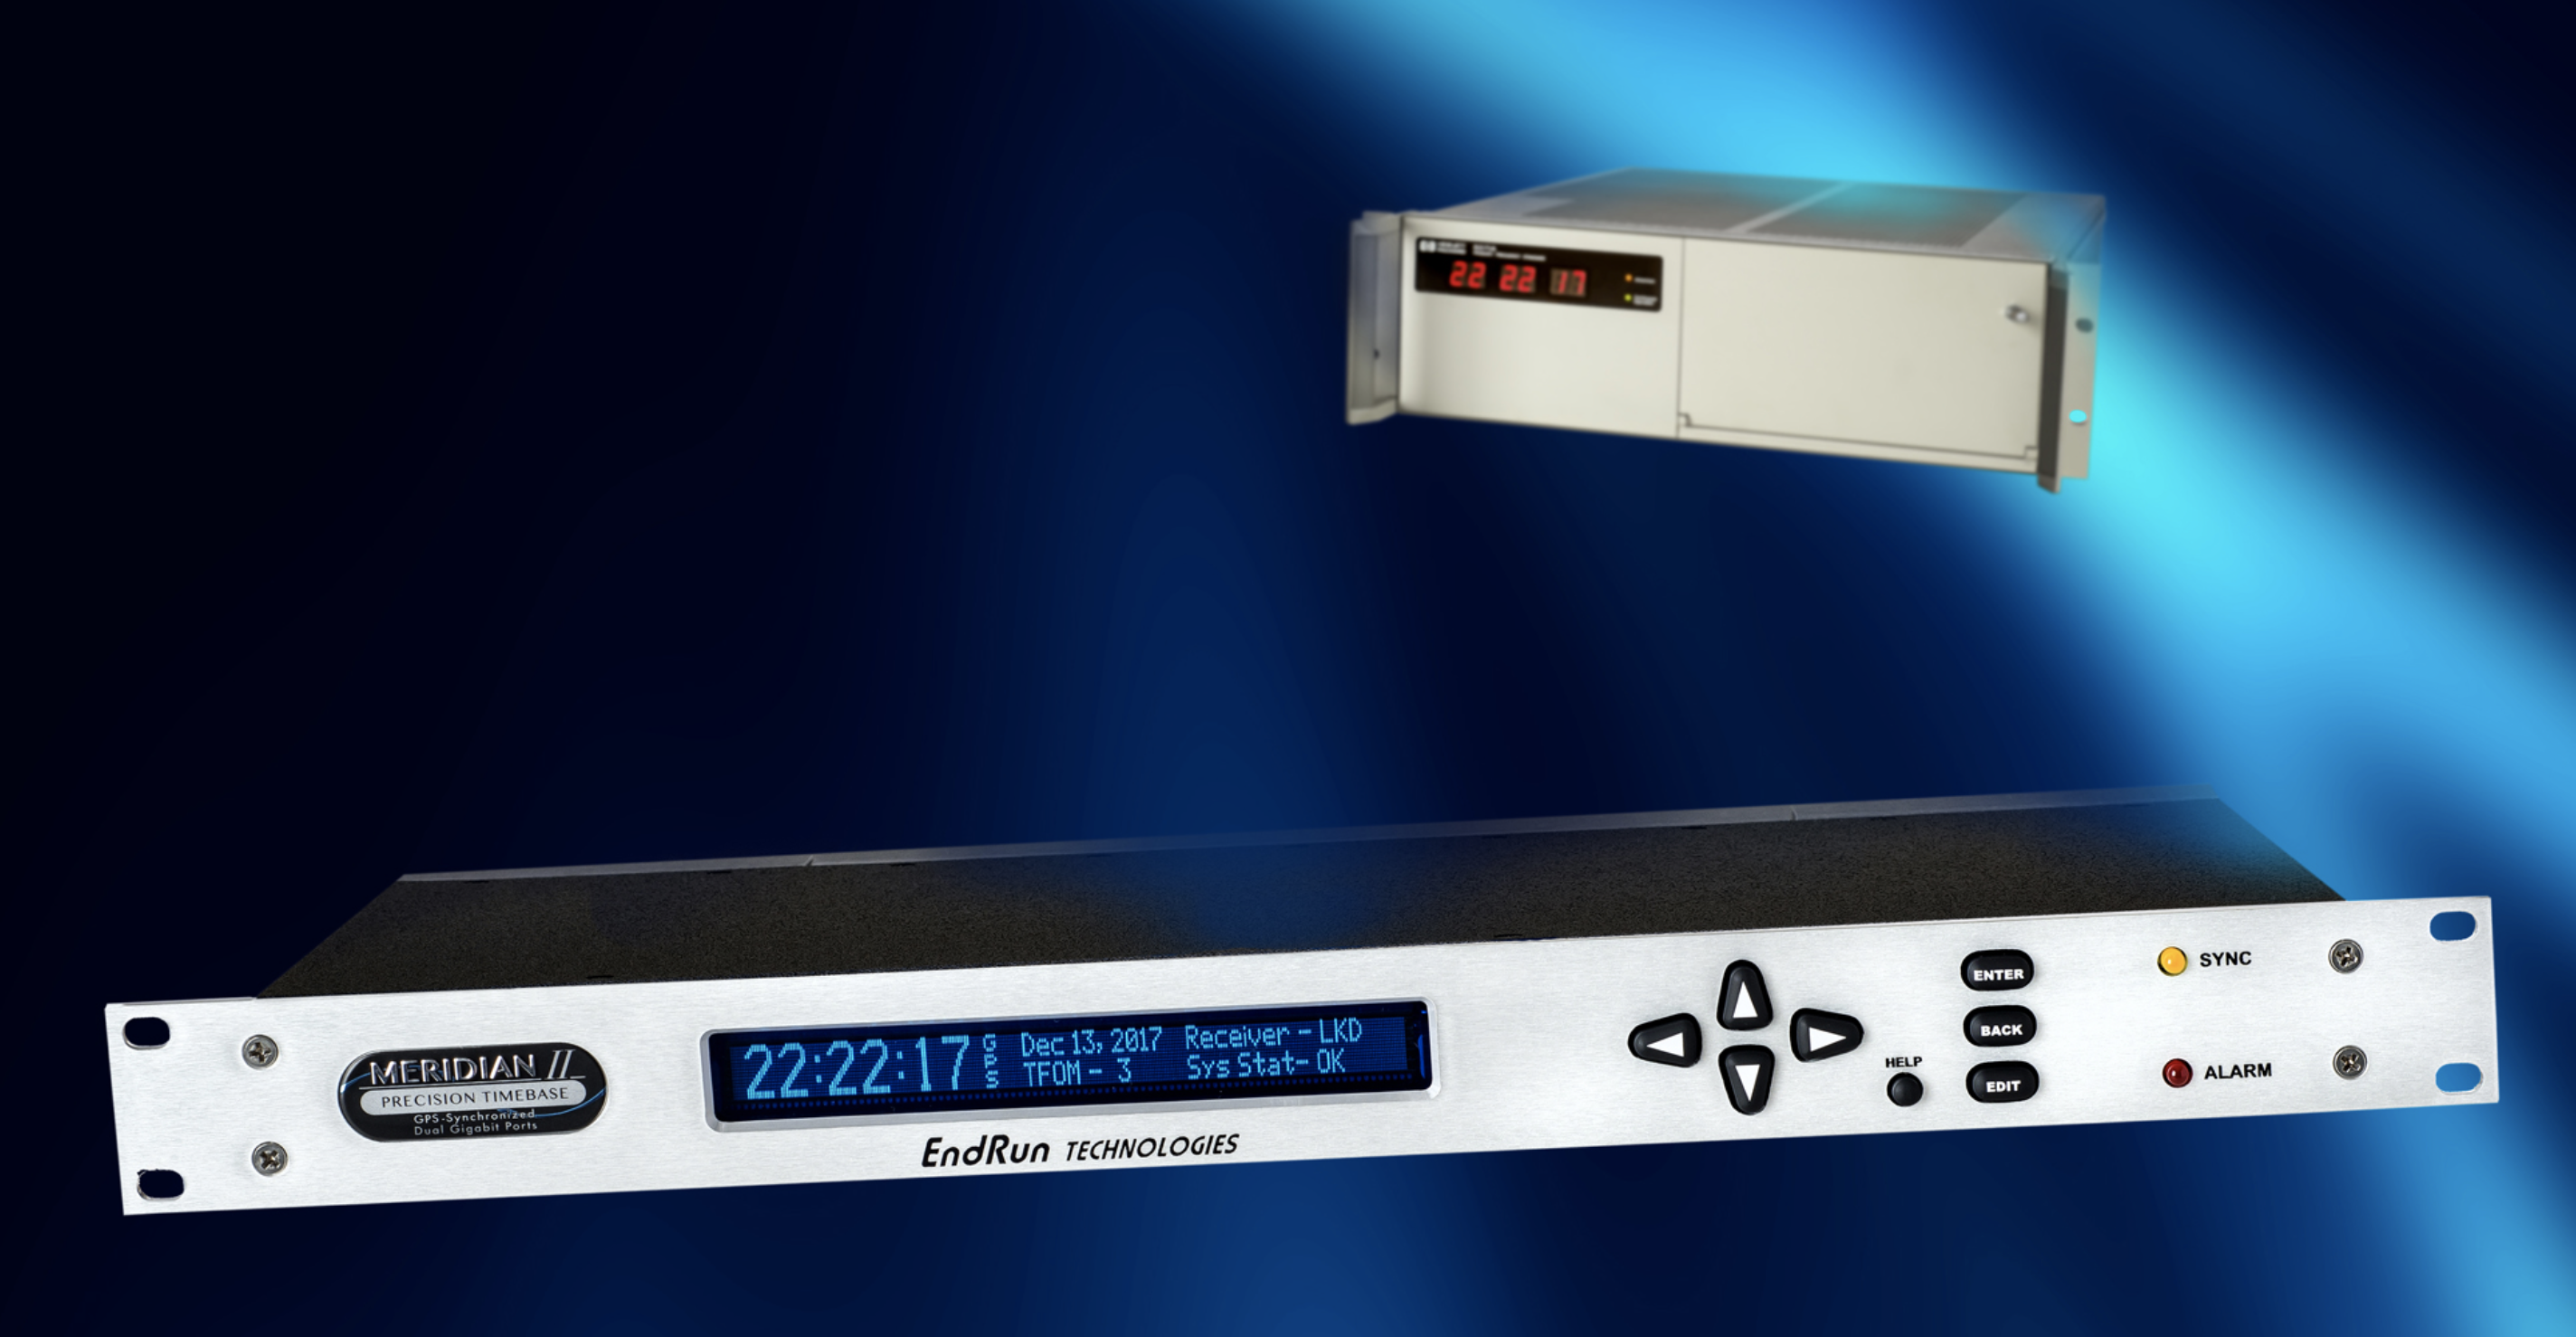 EndRun's Meridian II Precision TimeBase Combines GPS, 5071A Cesium and Ionospheric Corrections for Optimal Time and Frequency Standard